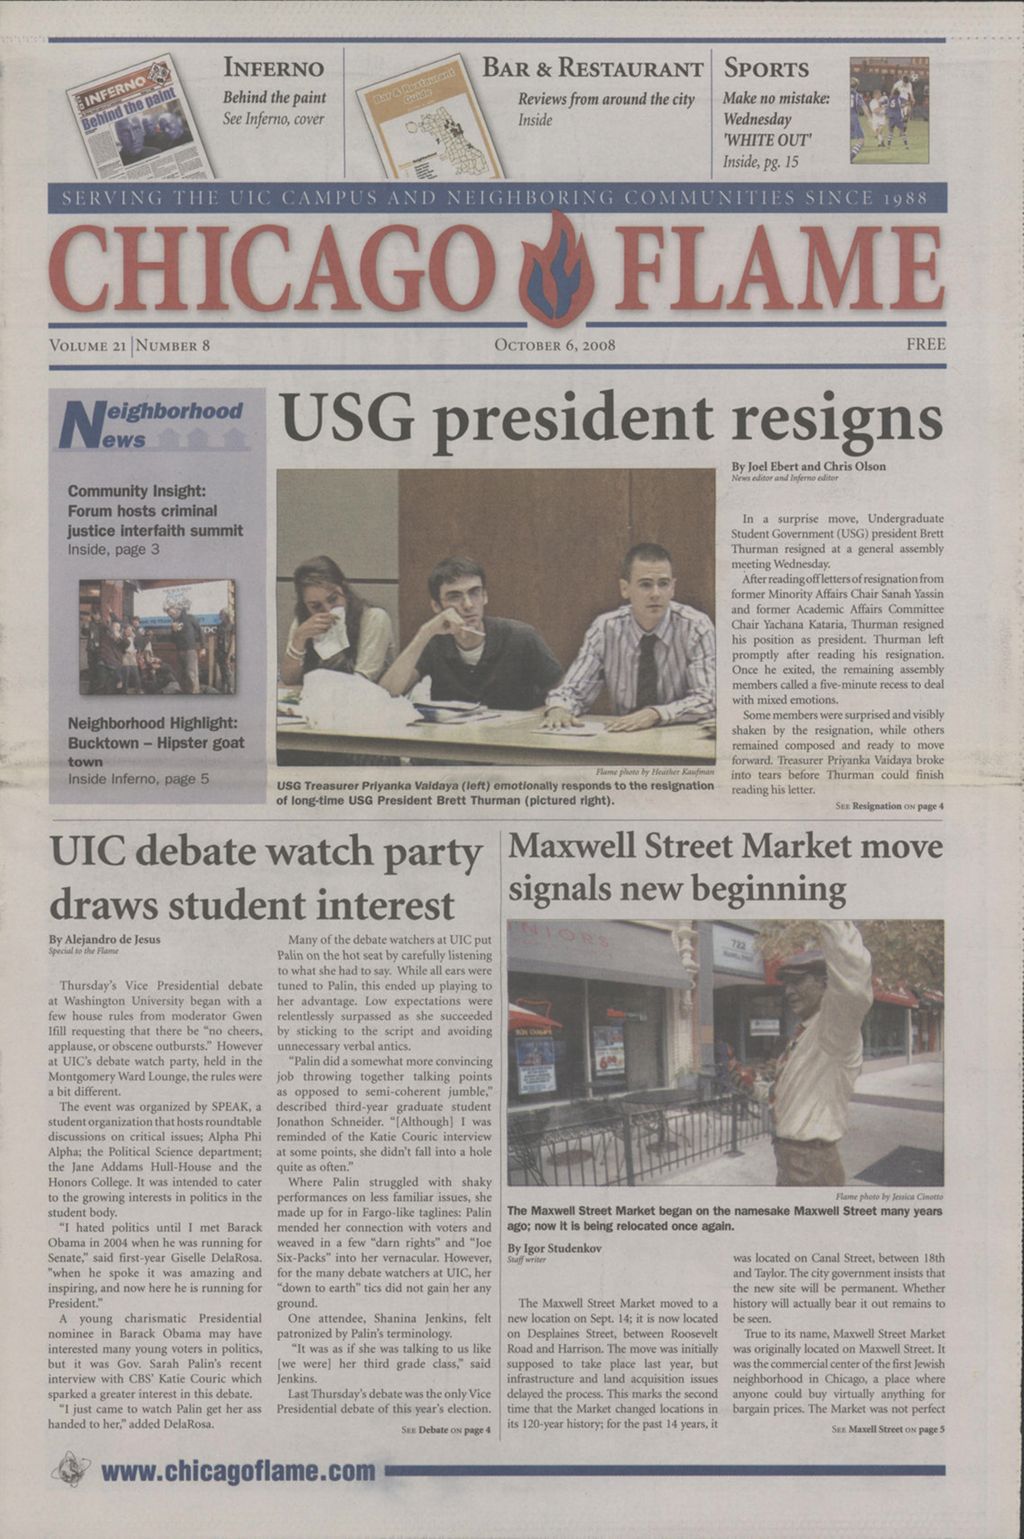 Chicago Flame (October 6, 2008)